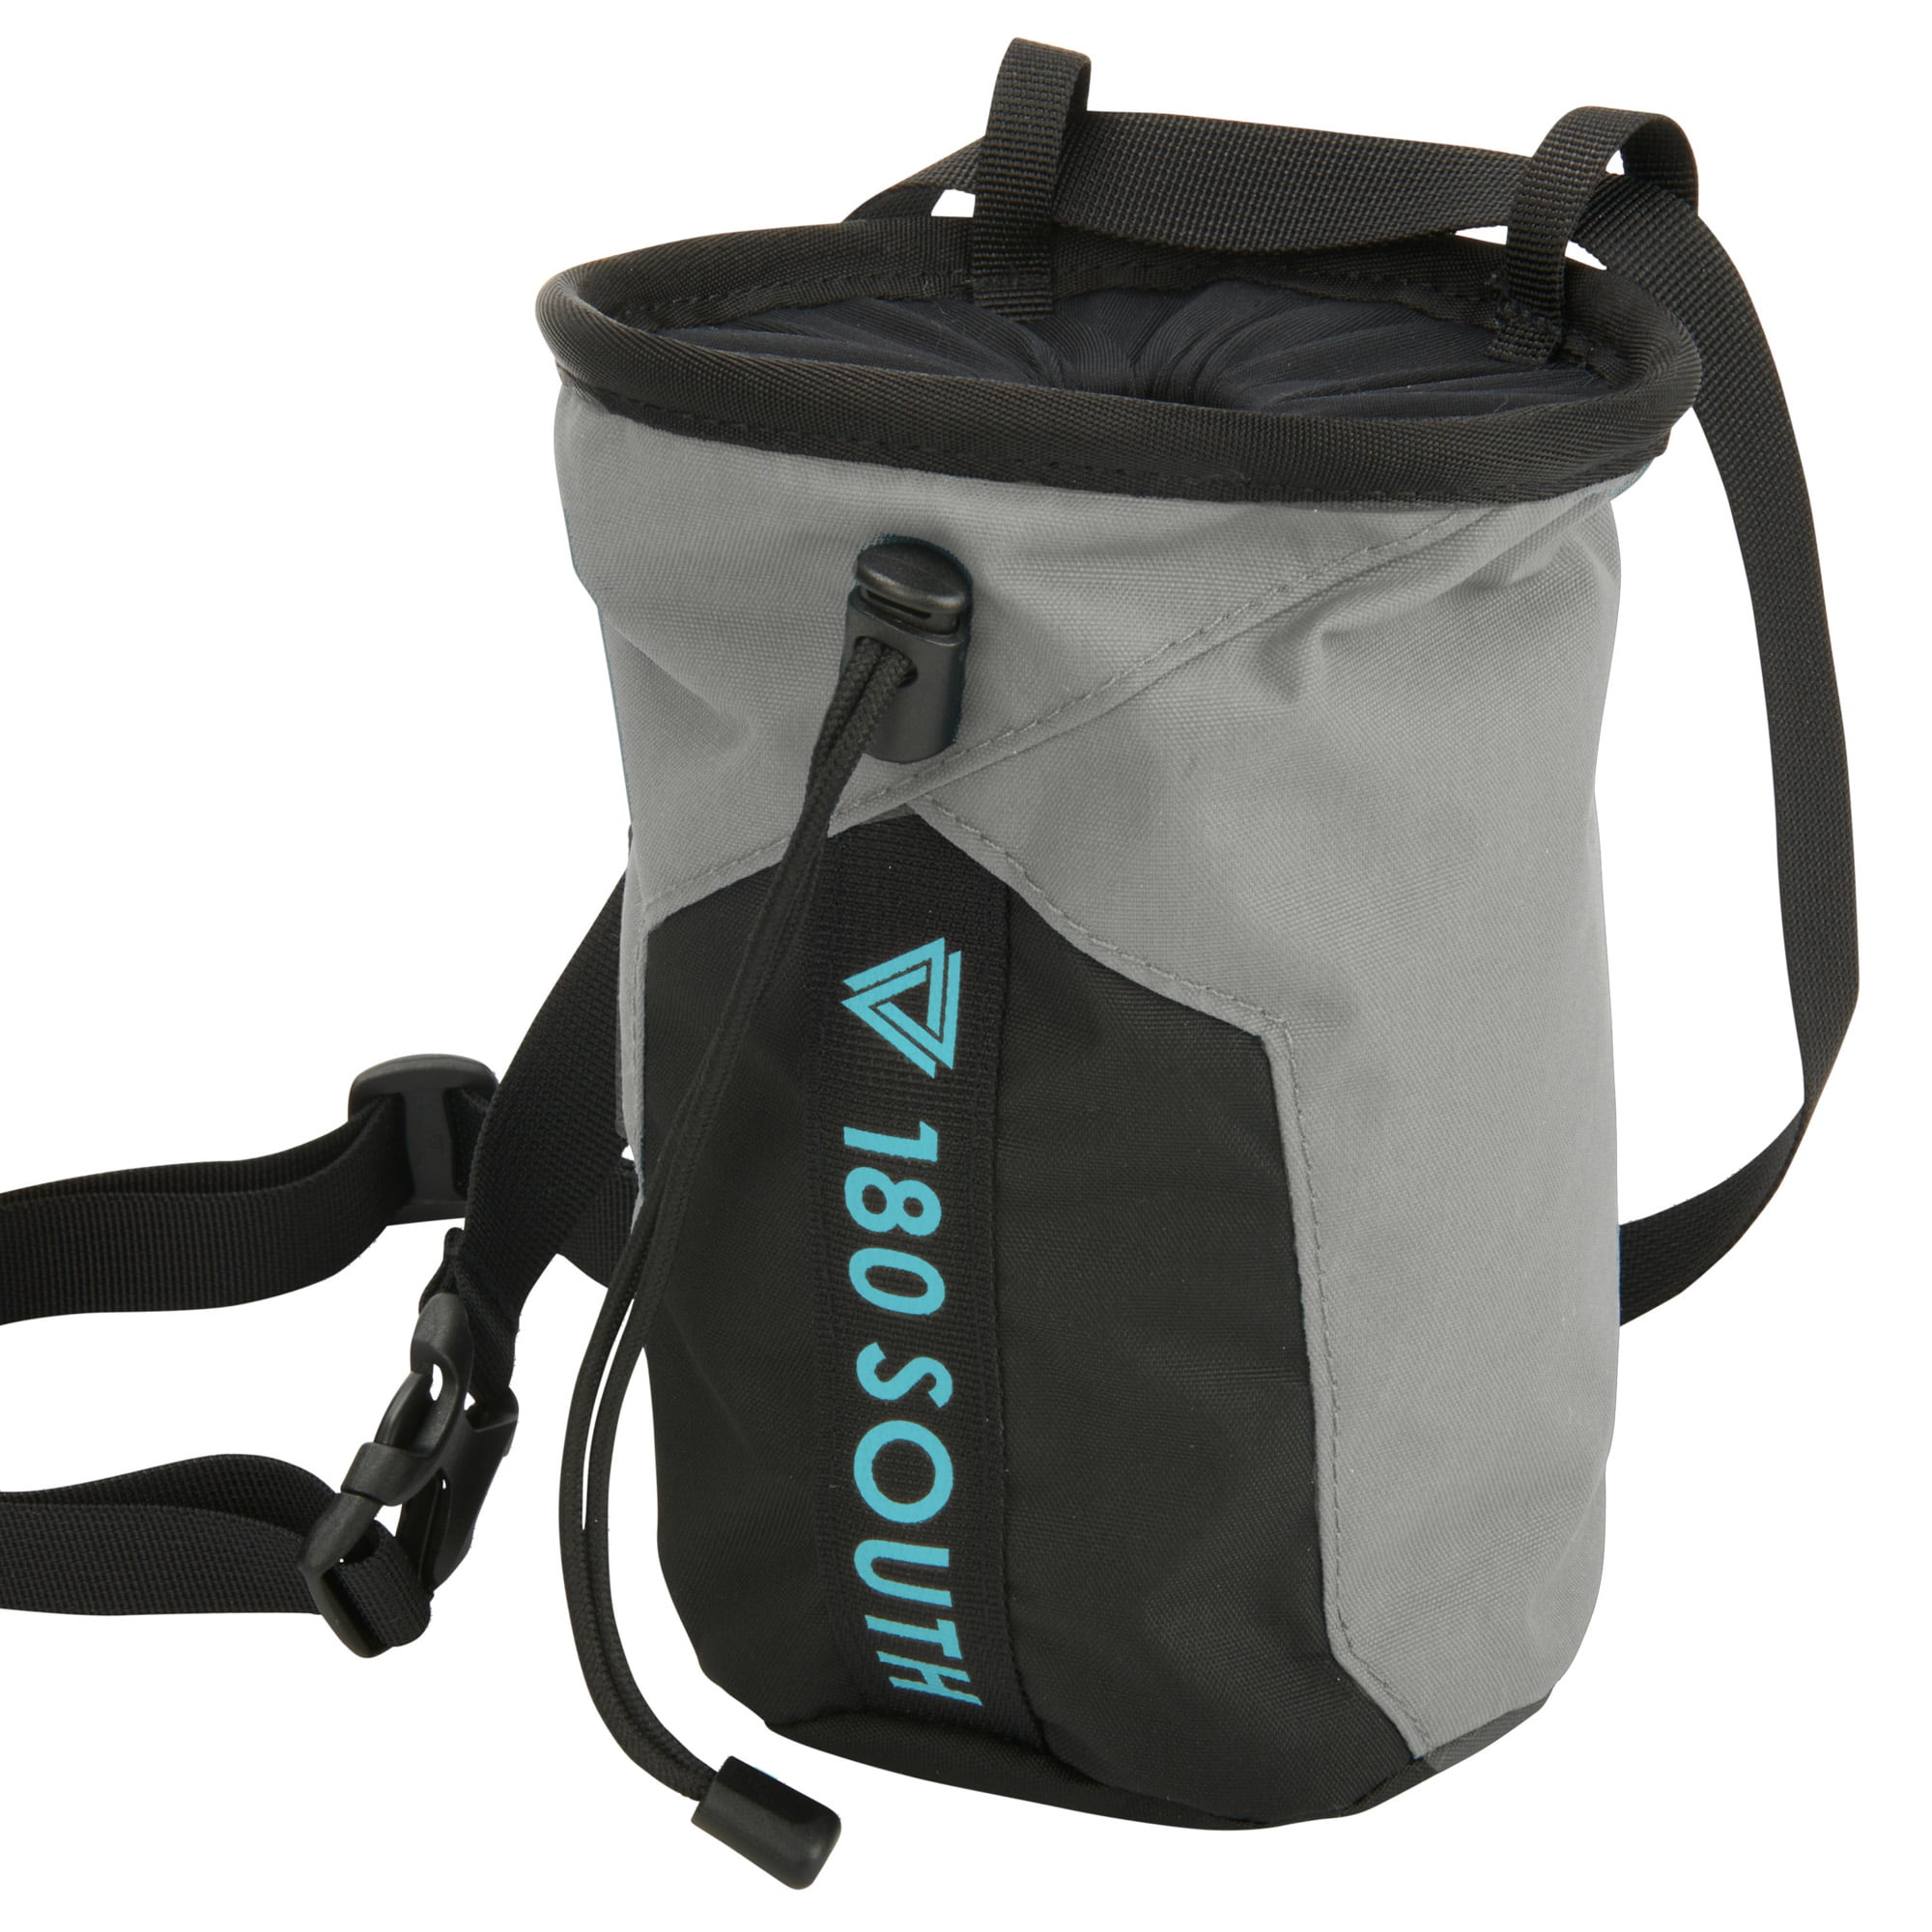 11 Best Chalk Bags & Buckets for Climbing + How to Pick